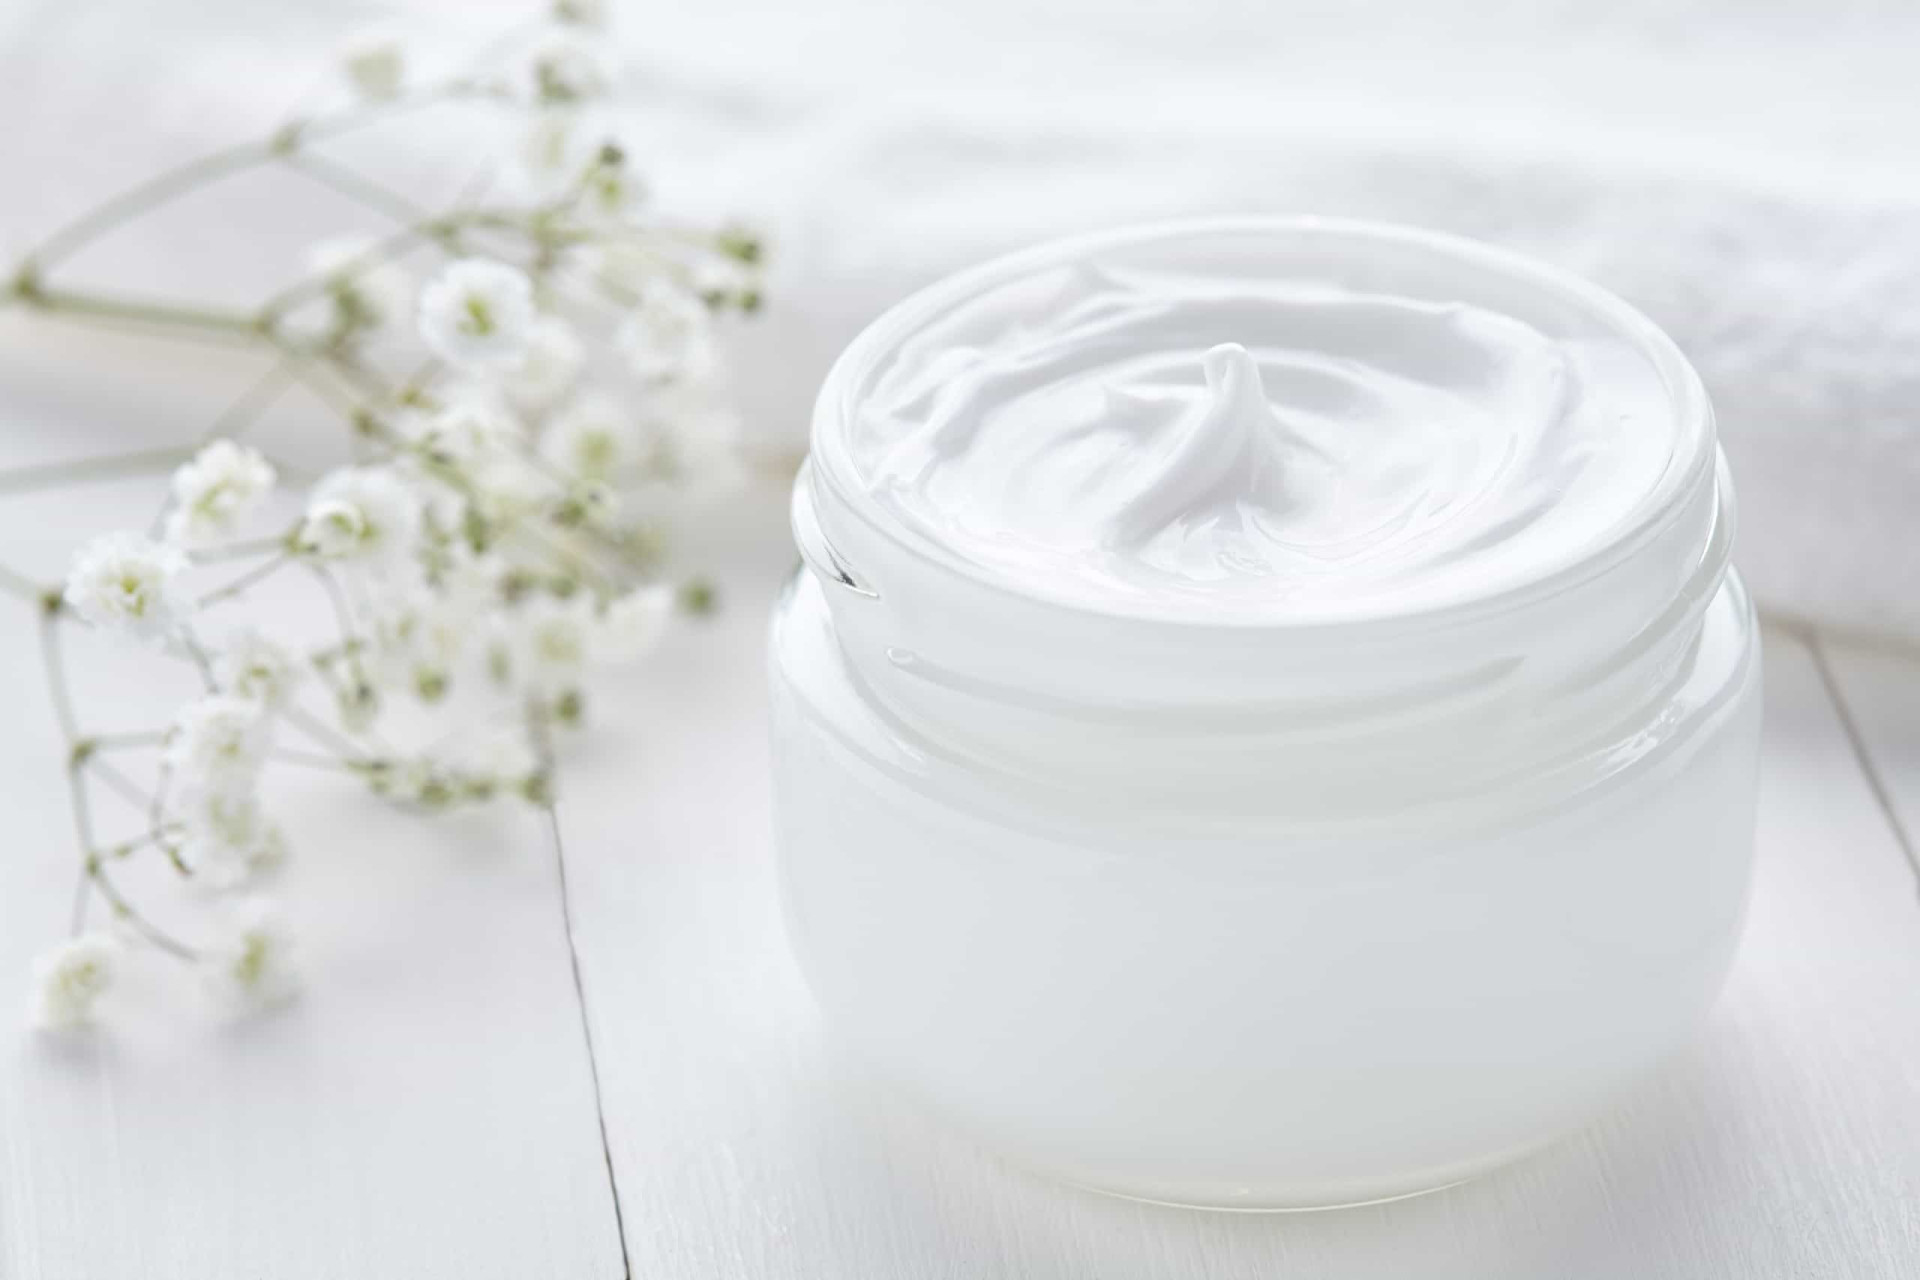 <p><span>The final stage of the facial is to apply a moisturizer. A moisturizer, whether store-bought or homemade, will lock in moisture and prevent dryness. </span></p>